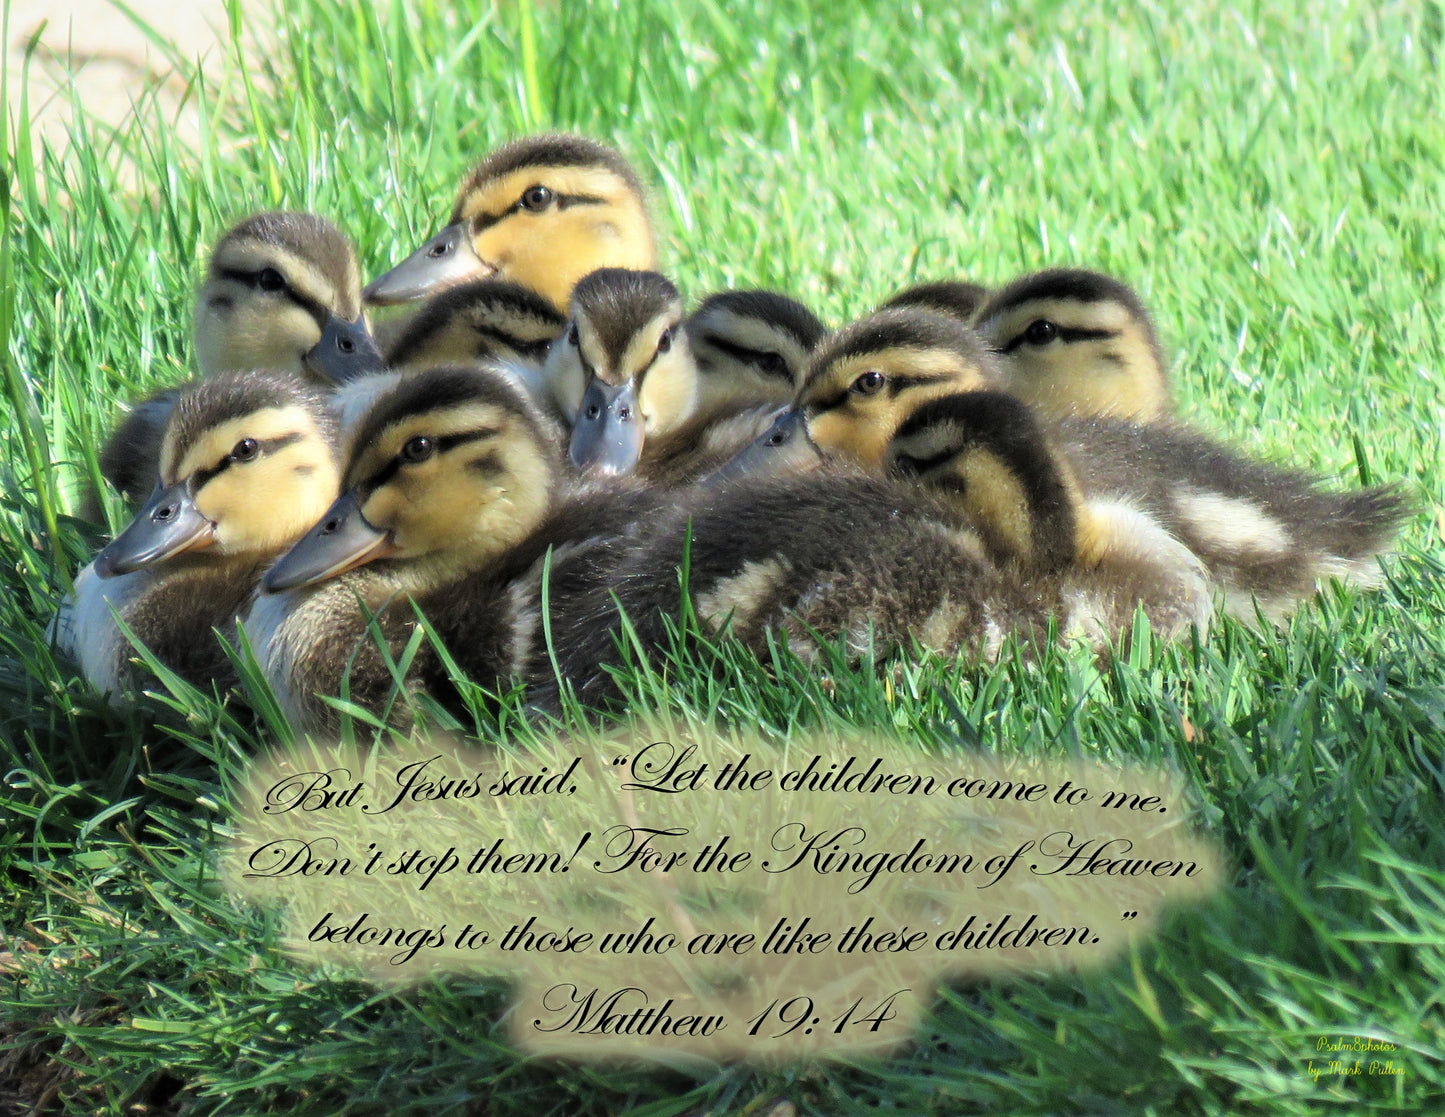 Photo Scripture Picture Baby Ducklings, grass, Highland Springs Country Club, Cherry Valley, California, Matthew 19:14